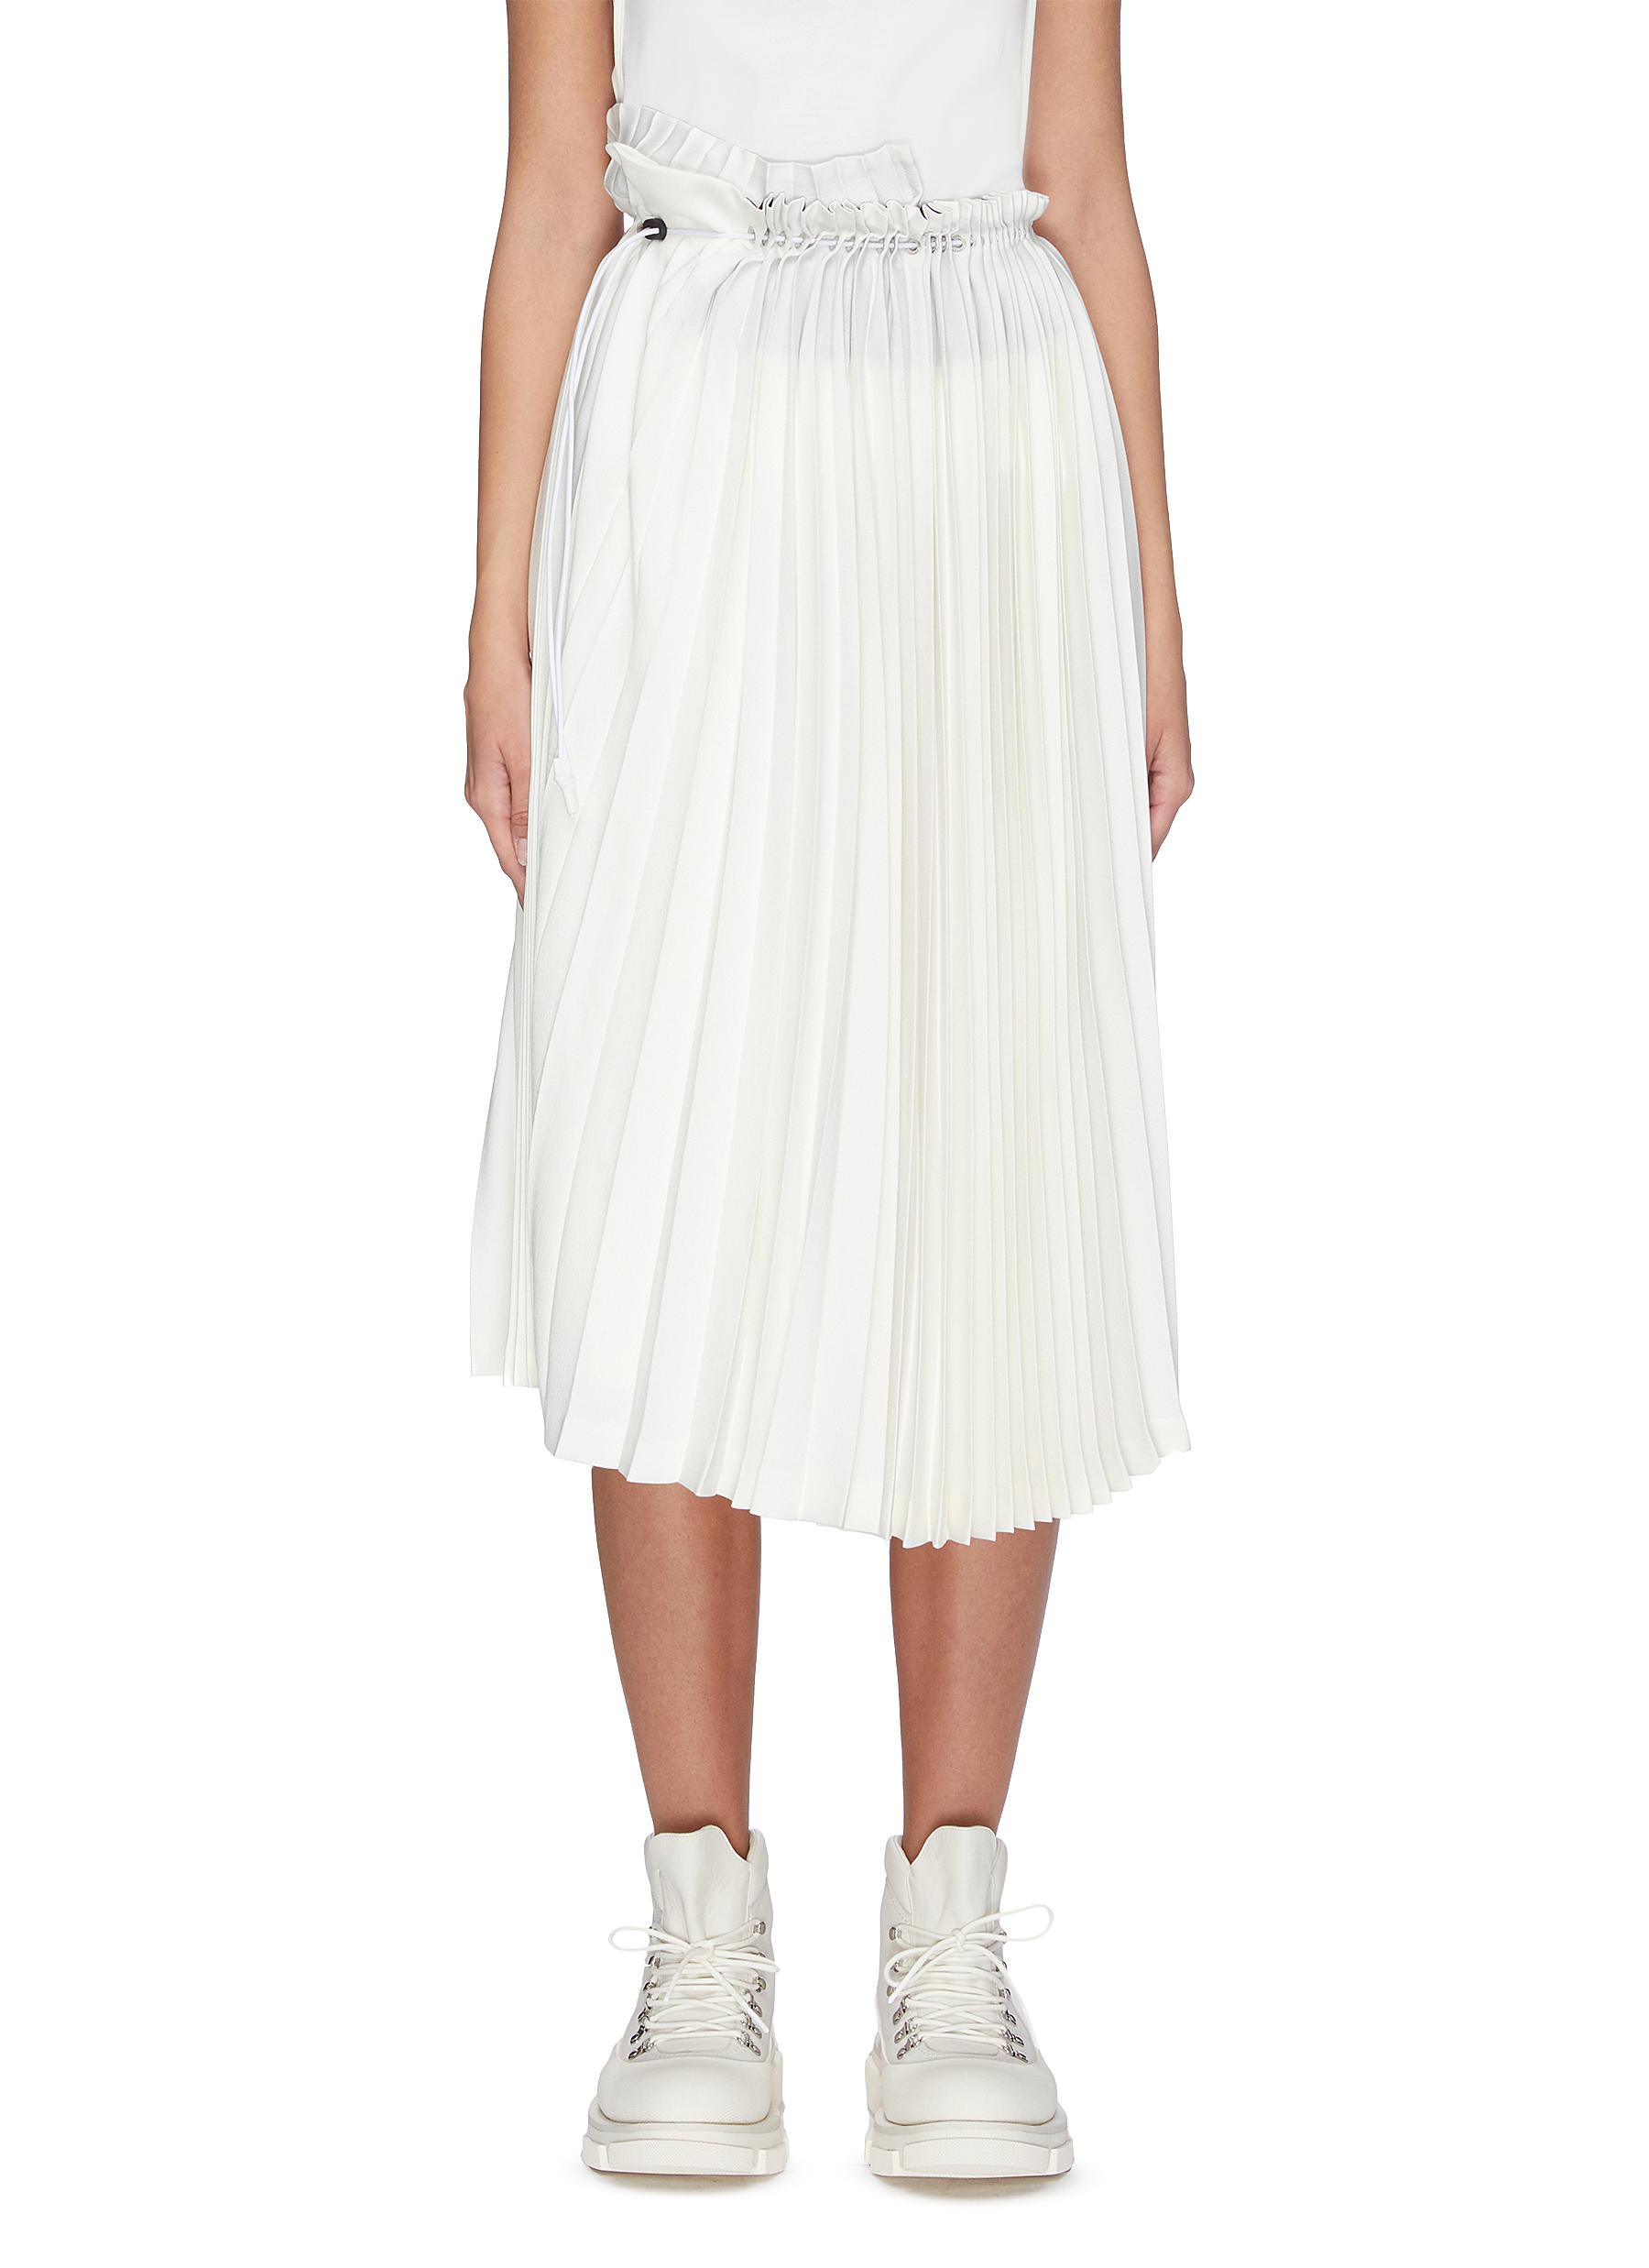 Drawstring waist pleated satin skirt by Toga Archives